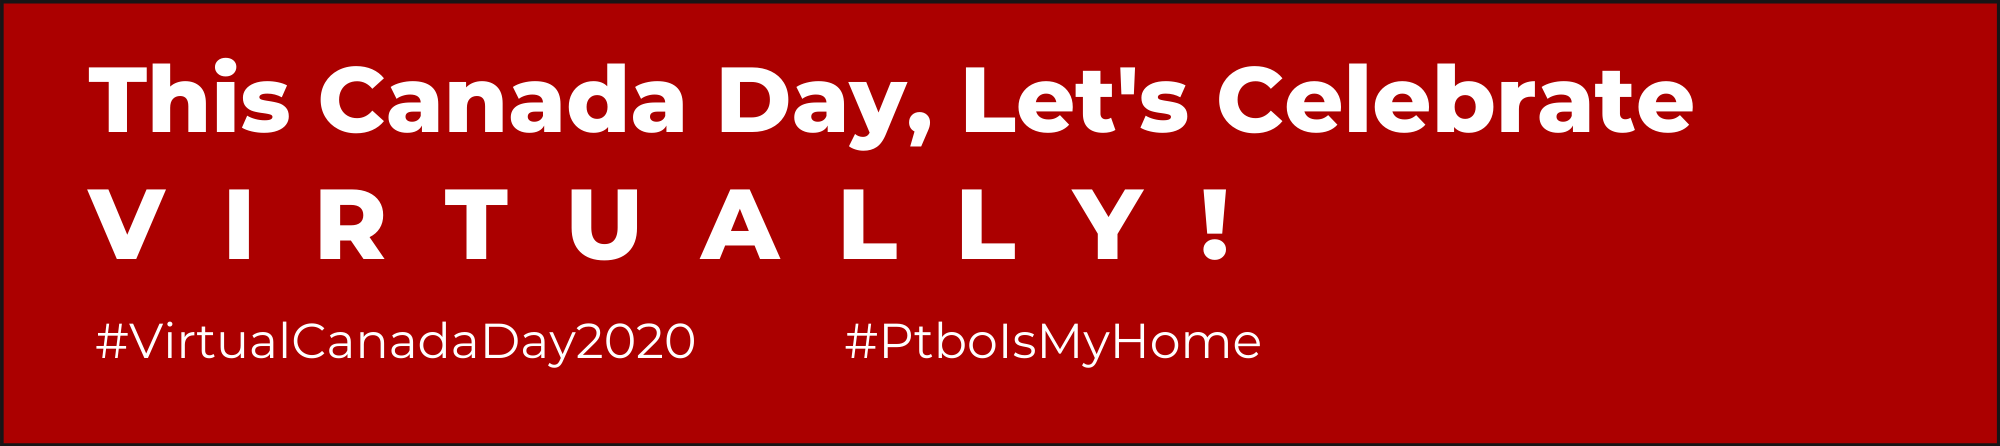 PtboIsMyHome - FRONT PAGE BANNER